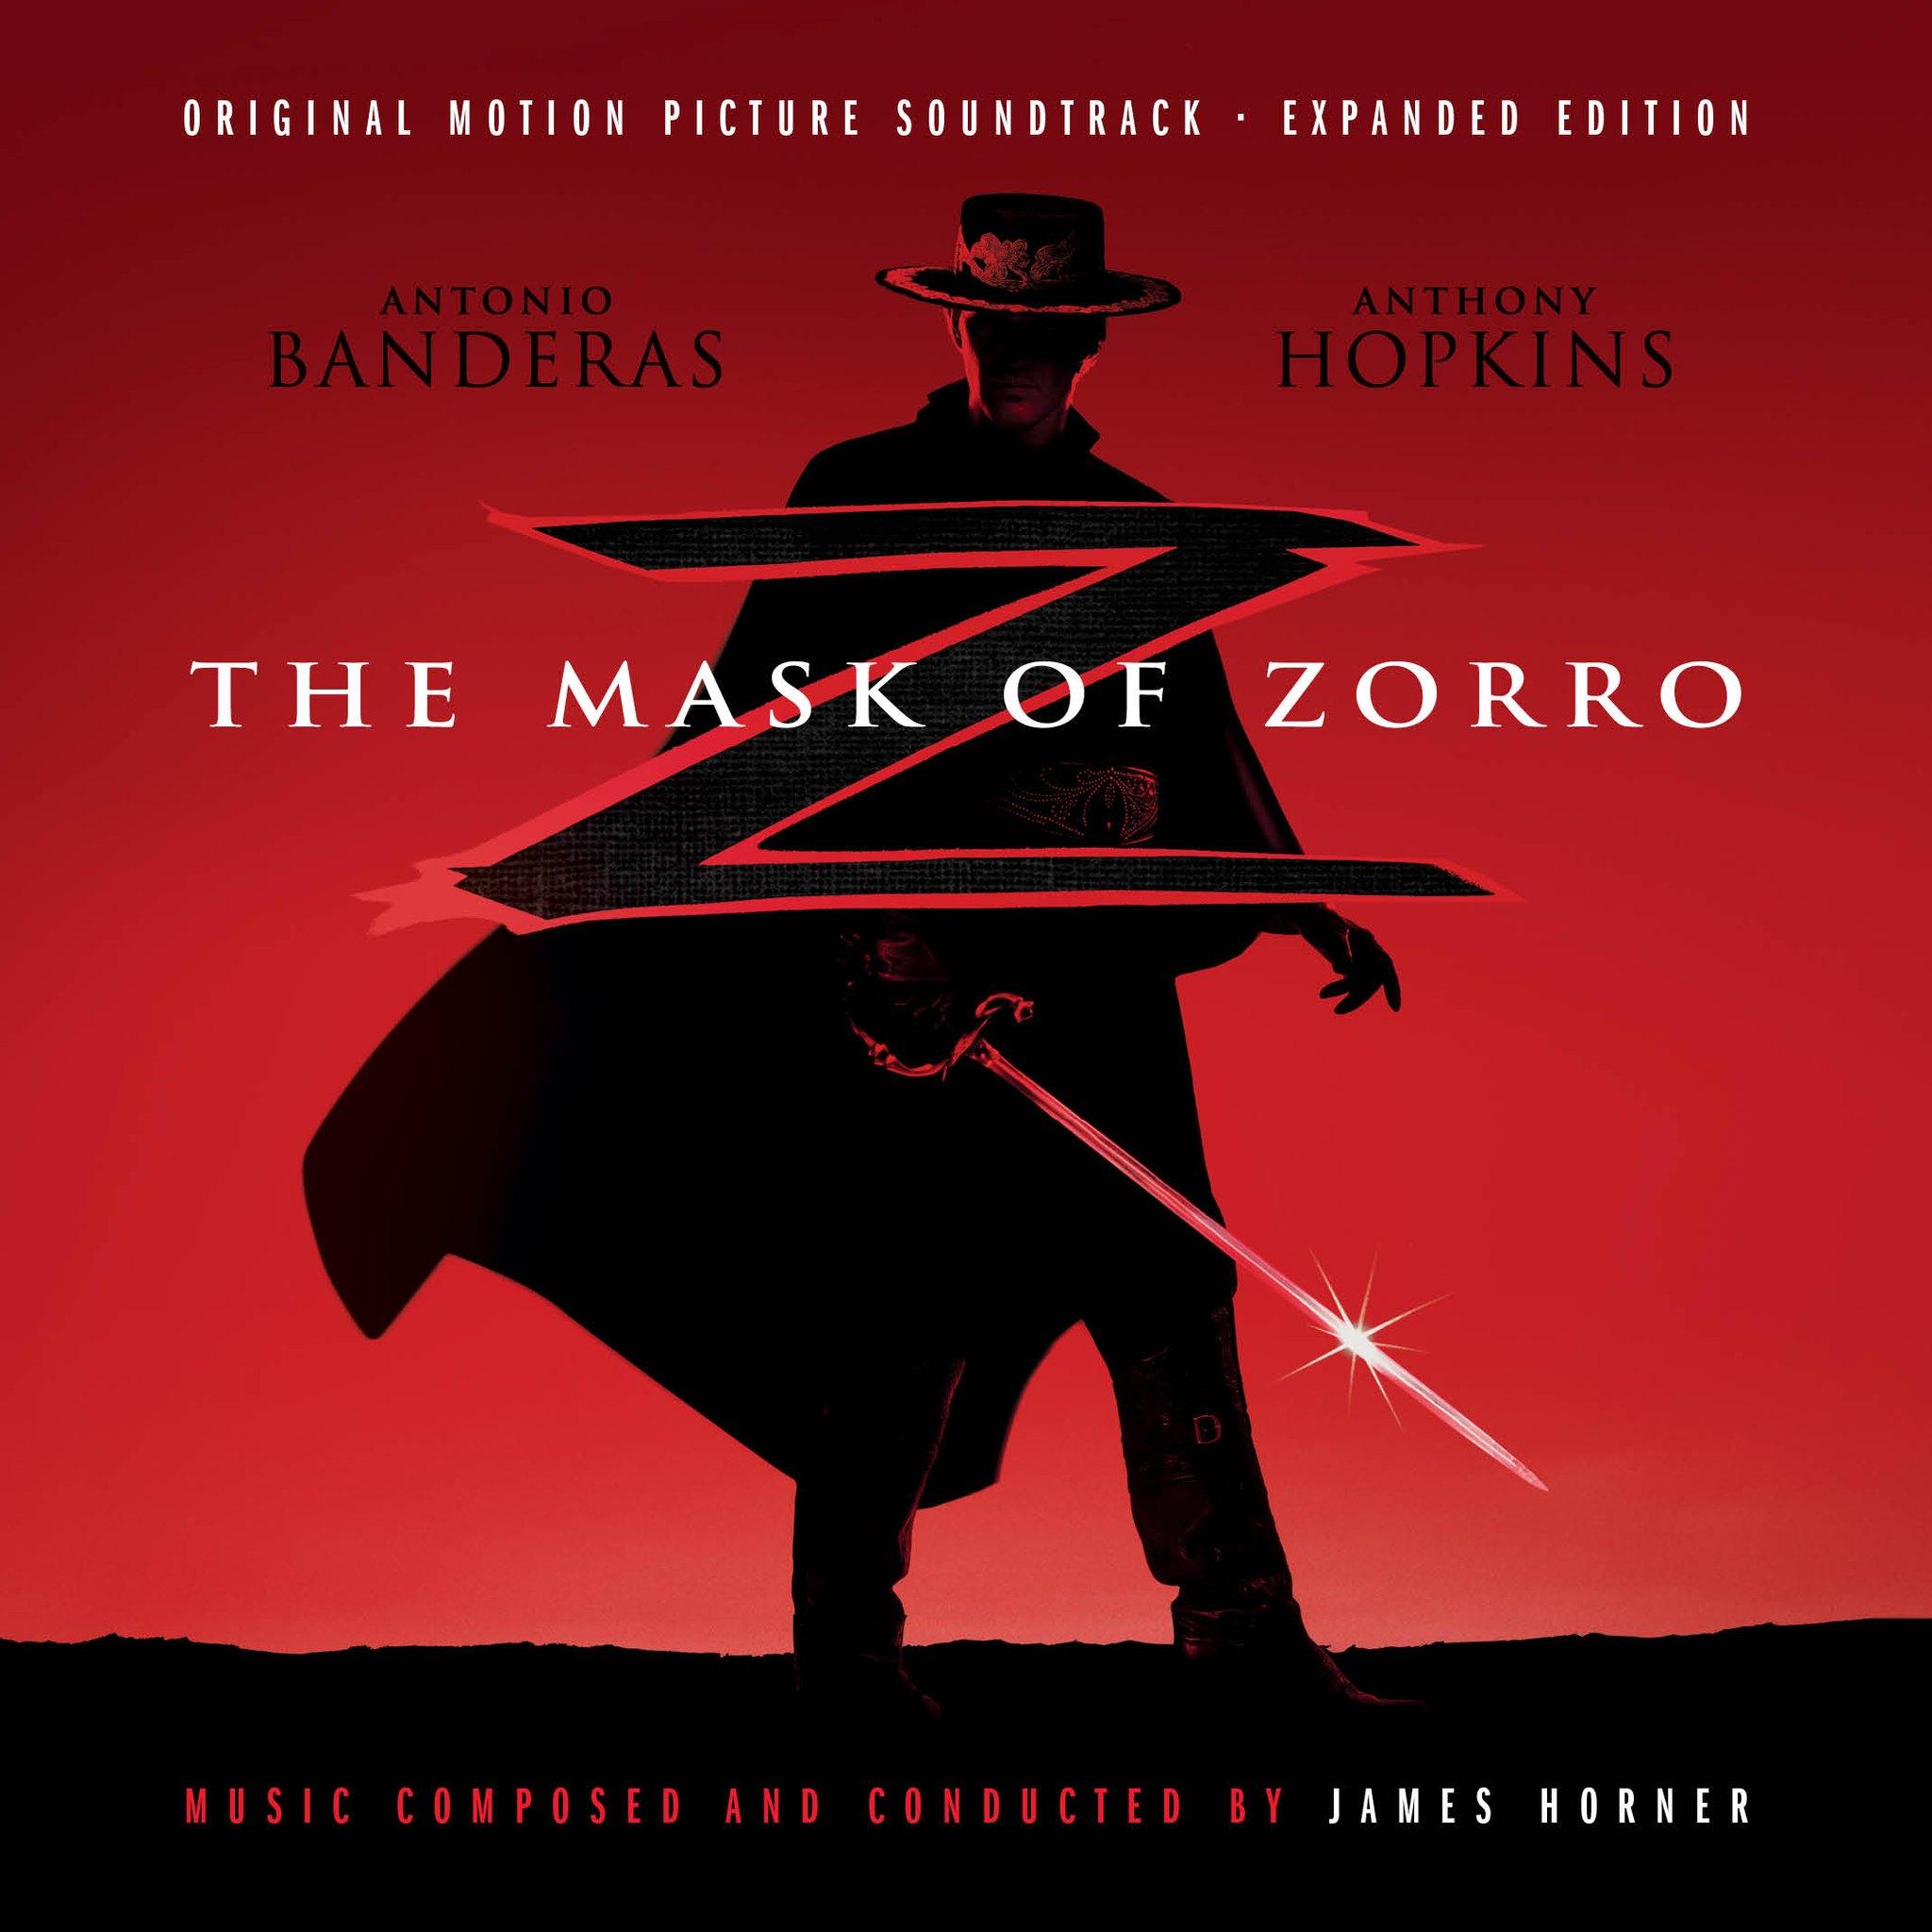 New 'Zorro' Moves Forward Without Banderas in New Trailer - Inside the Magic